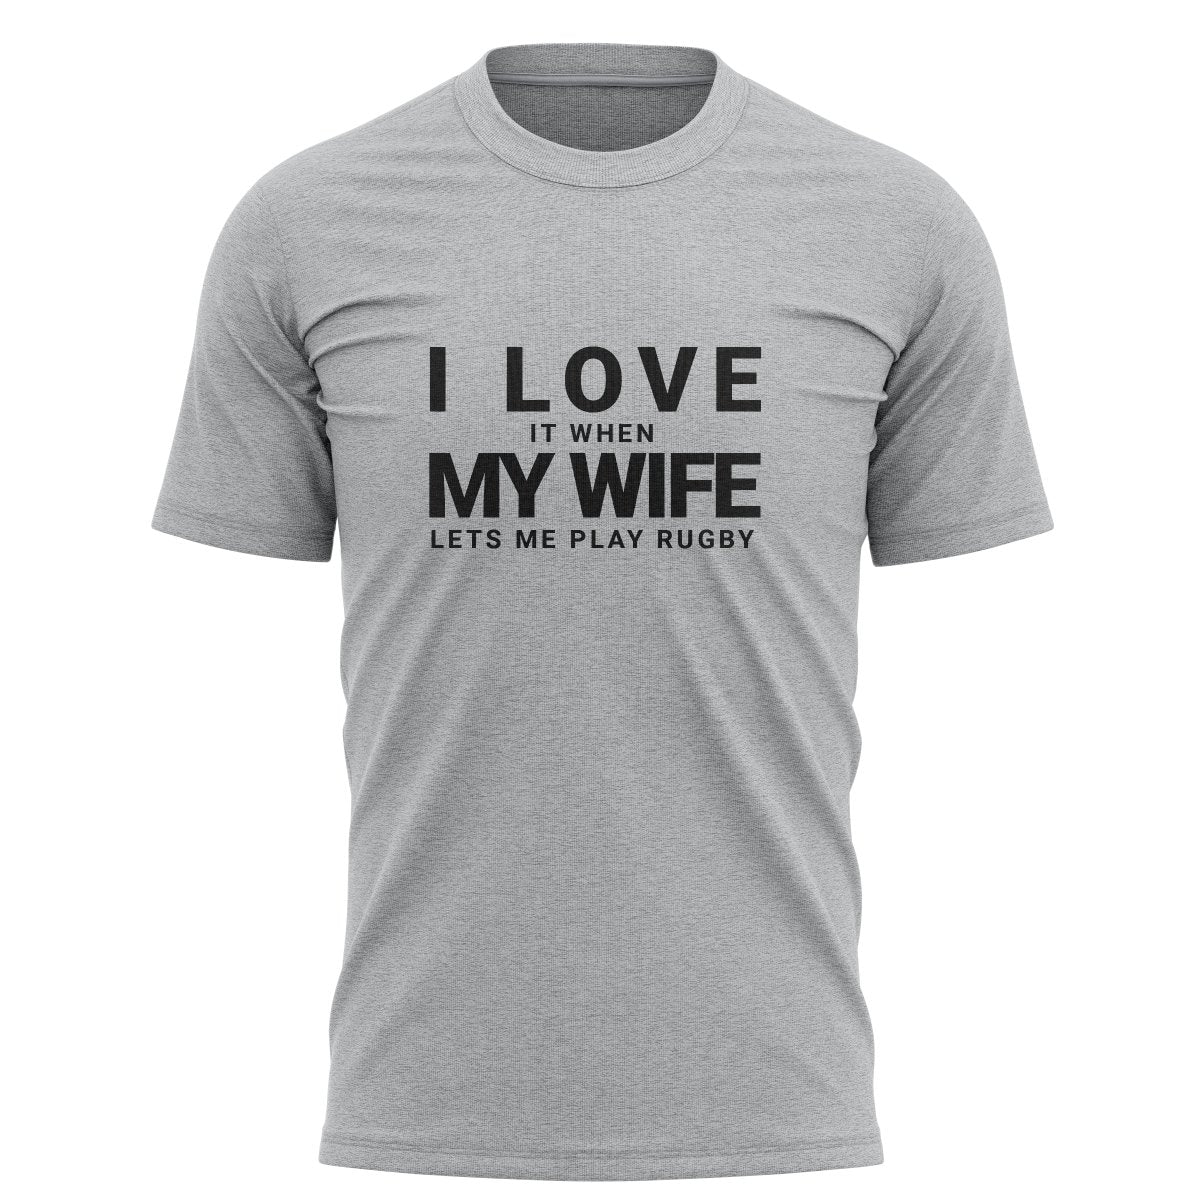 I Love My Wife Graphic Tee - www.therugbyshop.com www.therugbyshop.com MEN&#39;S / HEATHER GREY / S SANMAR TEES I Love My Wife Graphic Tee